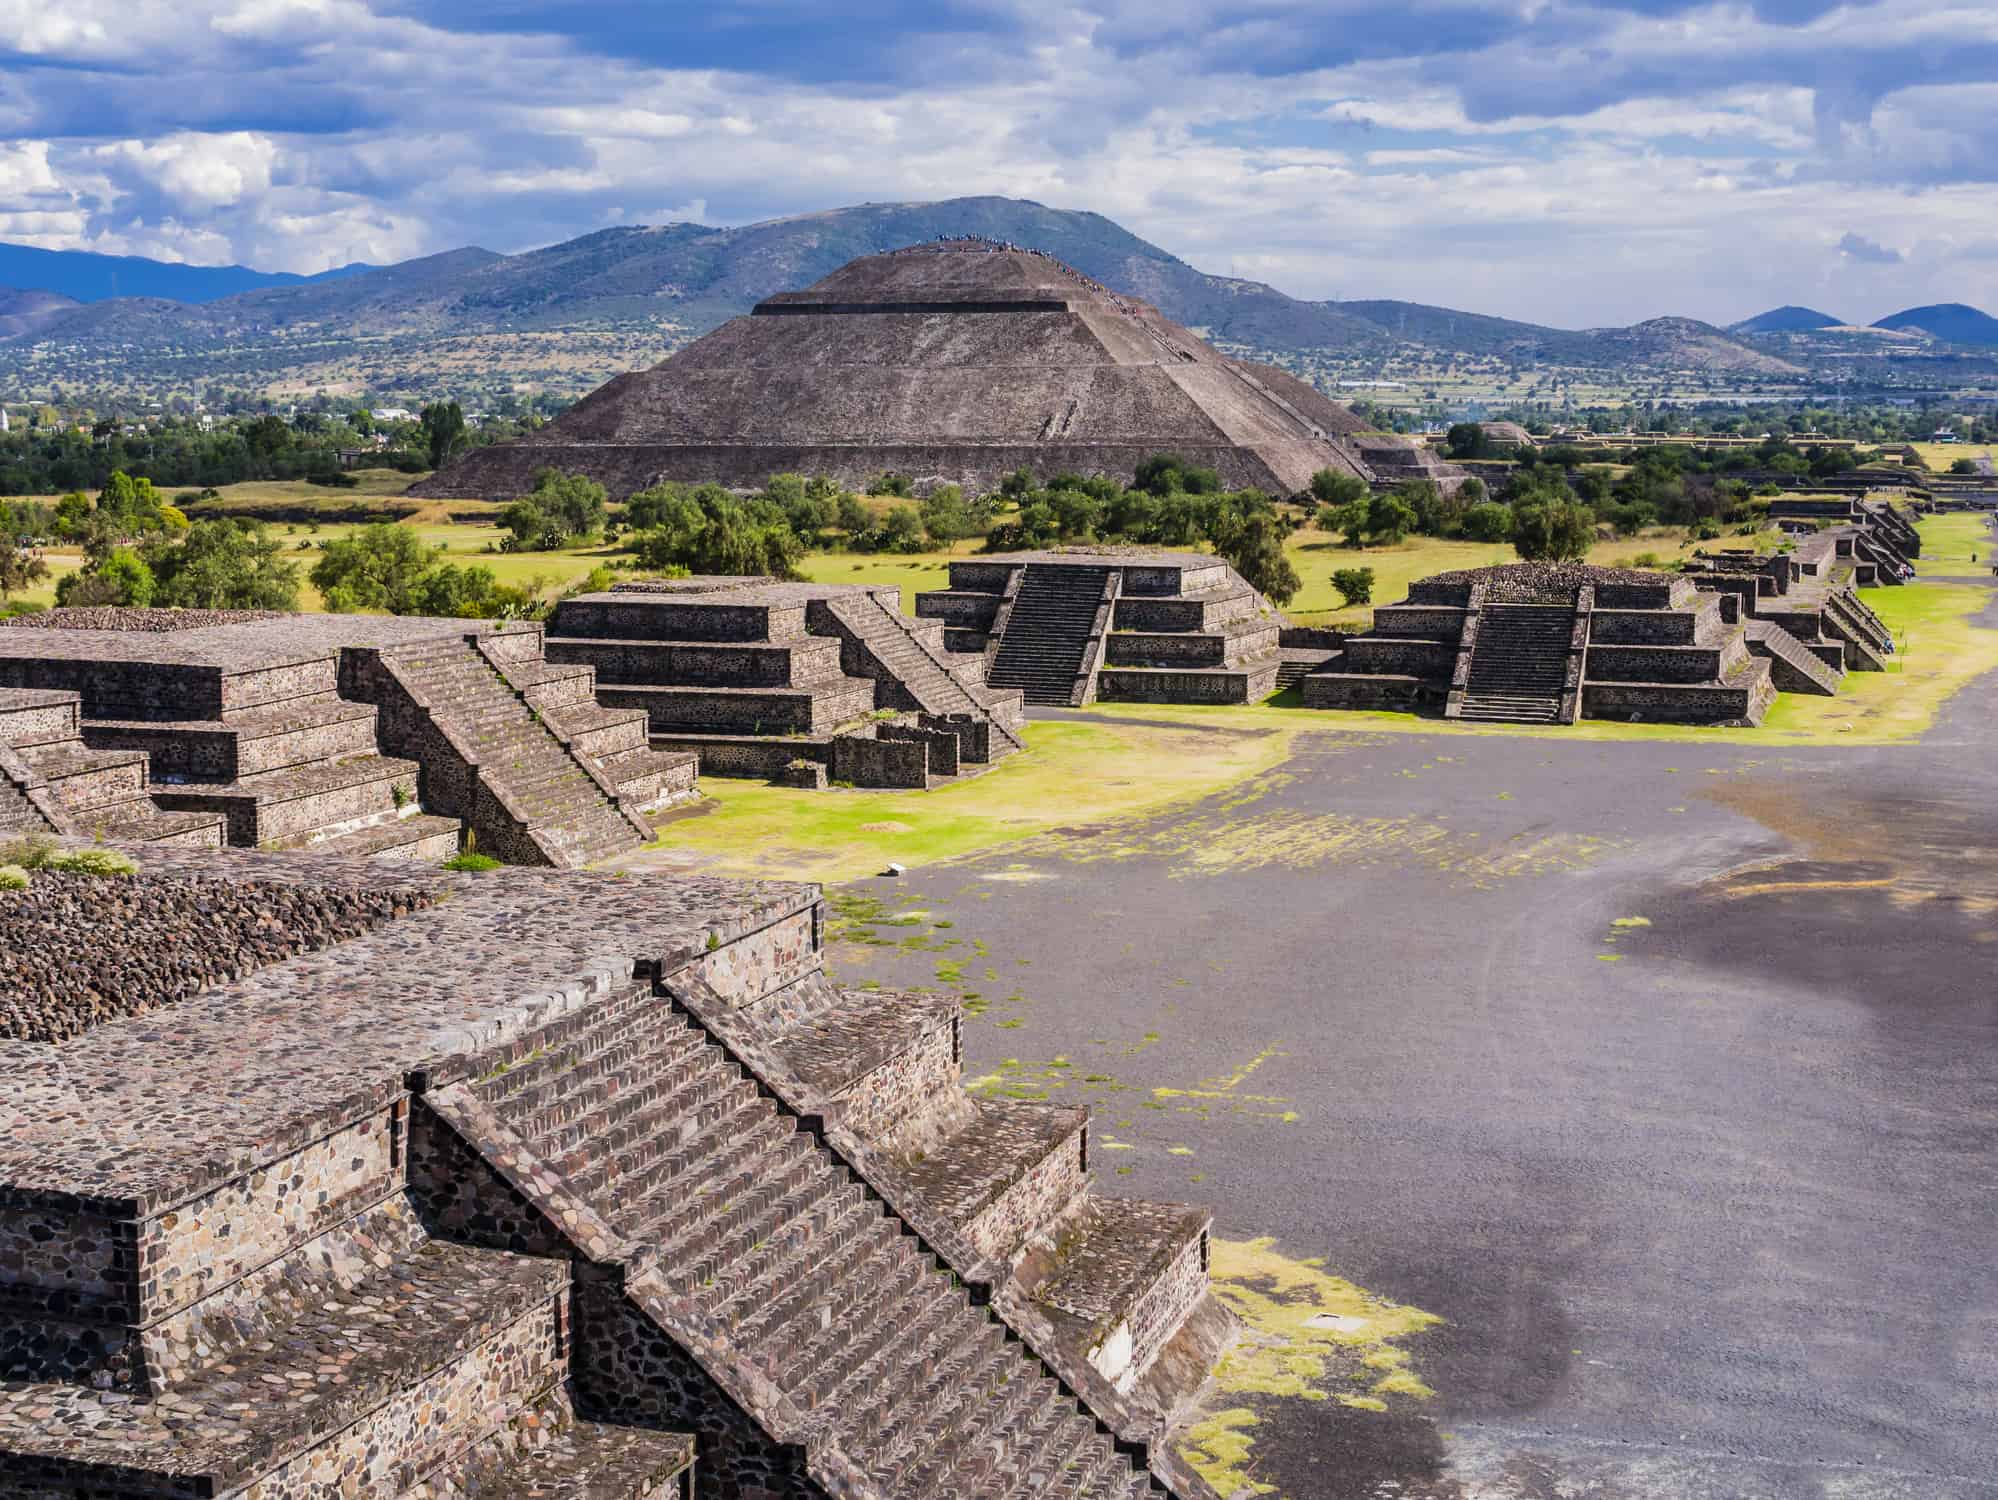 <p>Built directly across the Pyramid of the Moon, <a href="https://www.britannica.com/place/Pyramid-of-the-Sun" rel="noopener">the Pyramid of the Sun</a> is also found in the ancient city of Teotihuacan. This pyramid, however, was built before its counterpart. When the Aztecs arrived in the area, it was them who named it the Pyramid of the Sun, as Teotihuacan was already an abandoned city. There is not much documentation on why the ancient tribes built the Pyramid of the Sun, but it is believed that it was built for a god or goddess they believed in.</p>